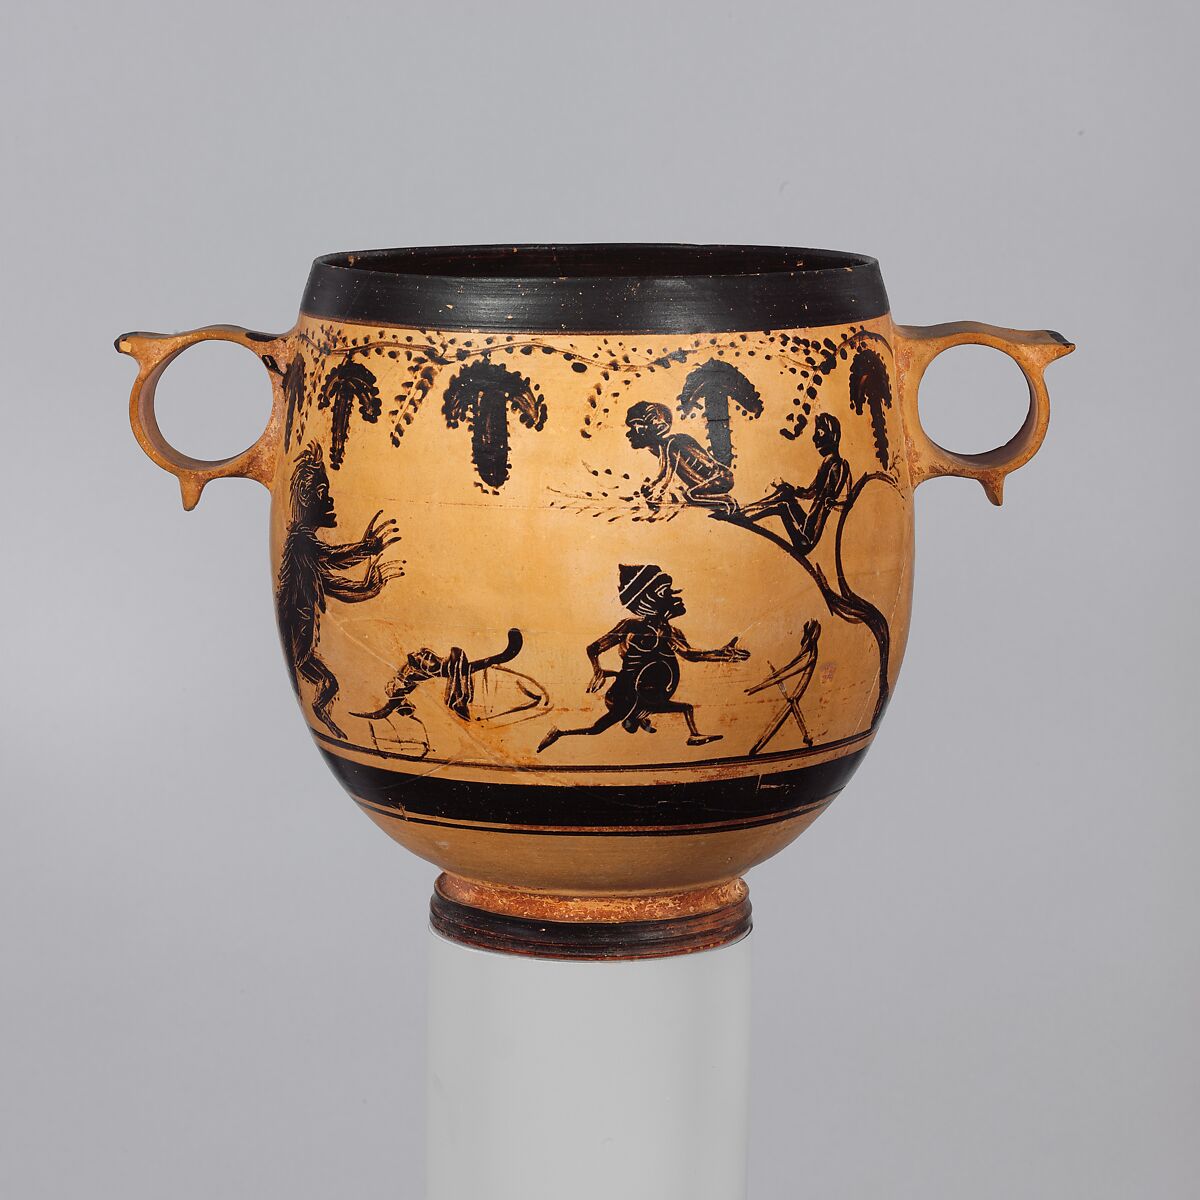 Terracotta skyphos (deep drinking cup), Closely related to the Vine Tendril Group, Terracotta, Greek, Boeotian 